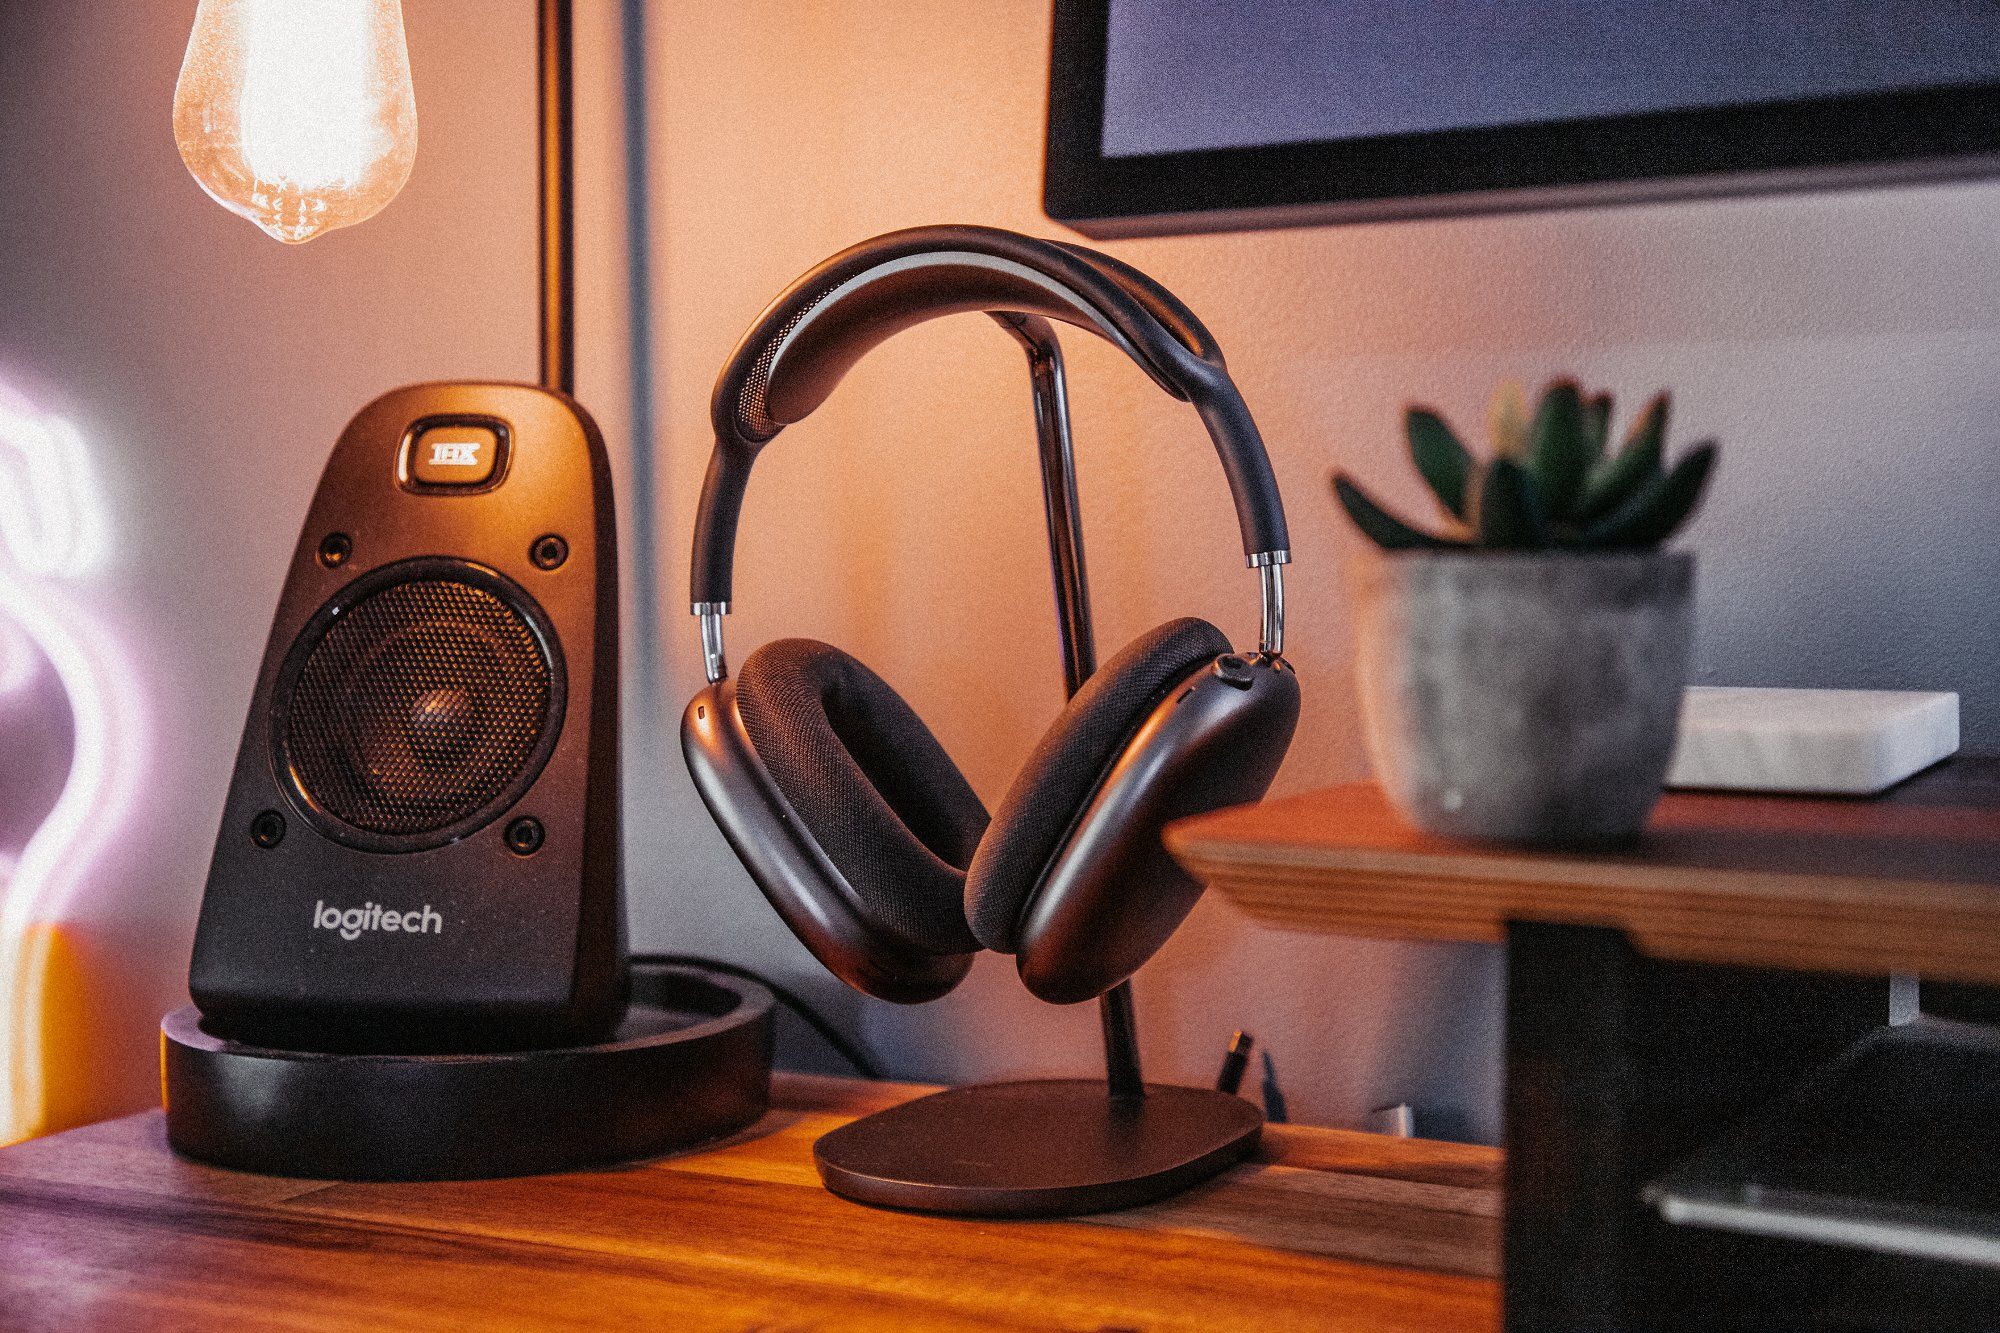 A Logitech Z623 THX speaker, AirPods Max noise-cancelling headphones, and a cactus in a small planter at the neatly-organised creative desk setup